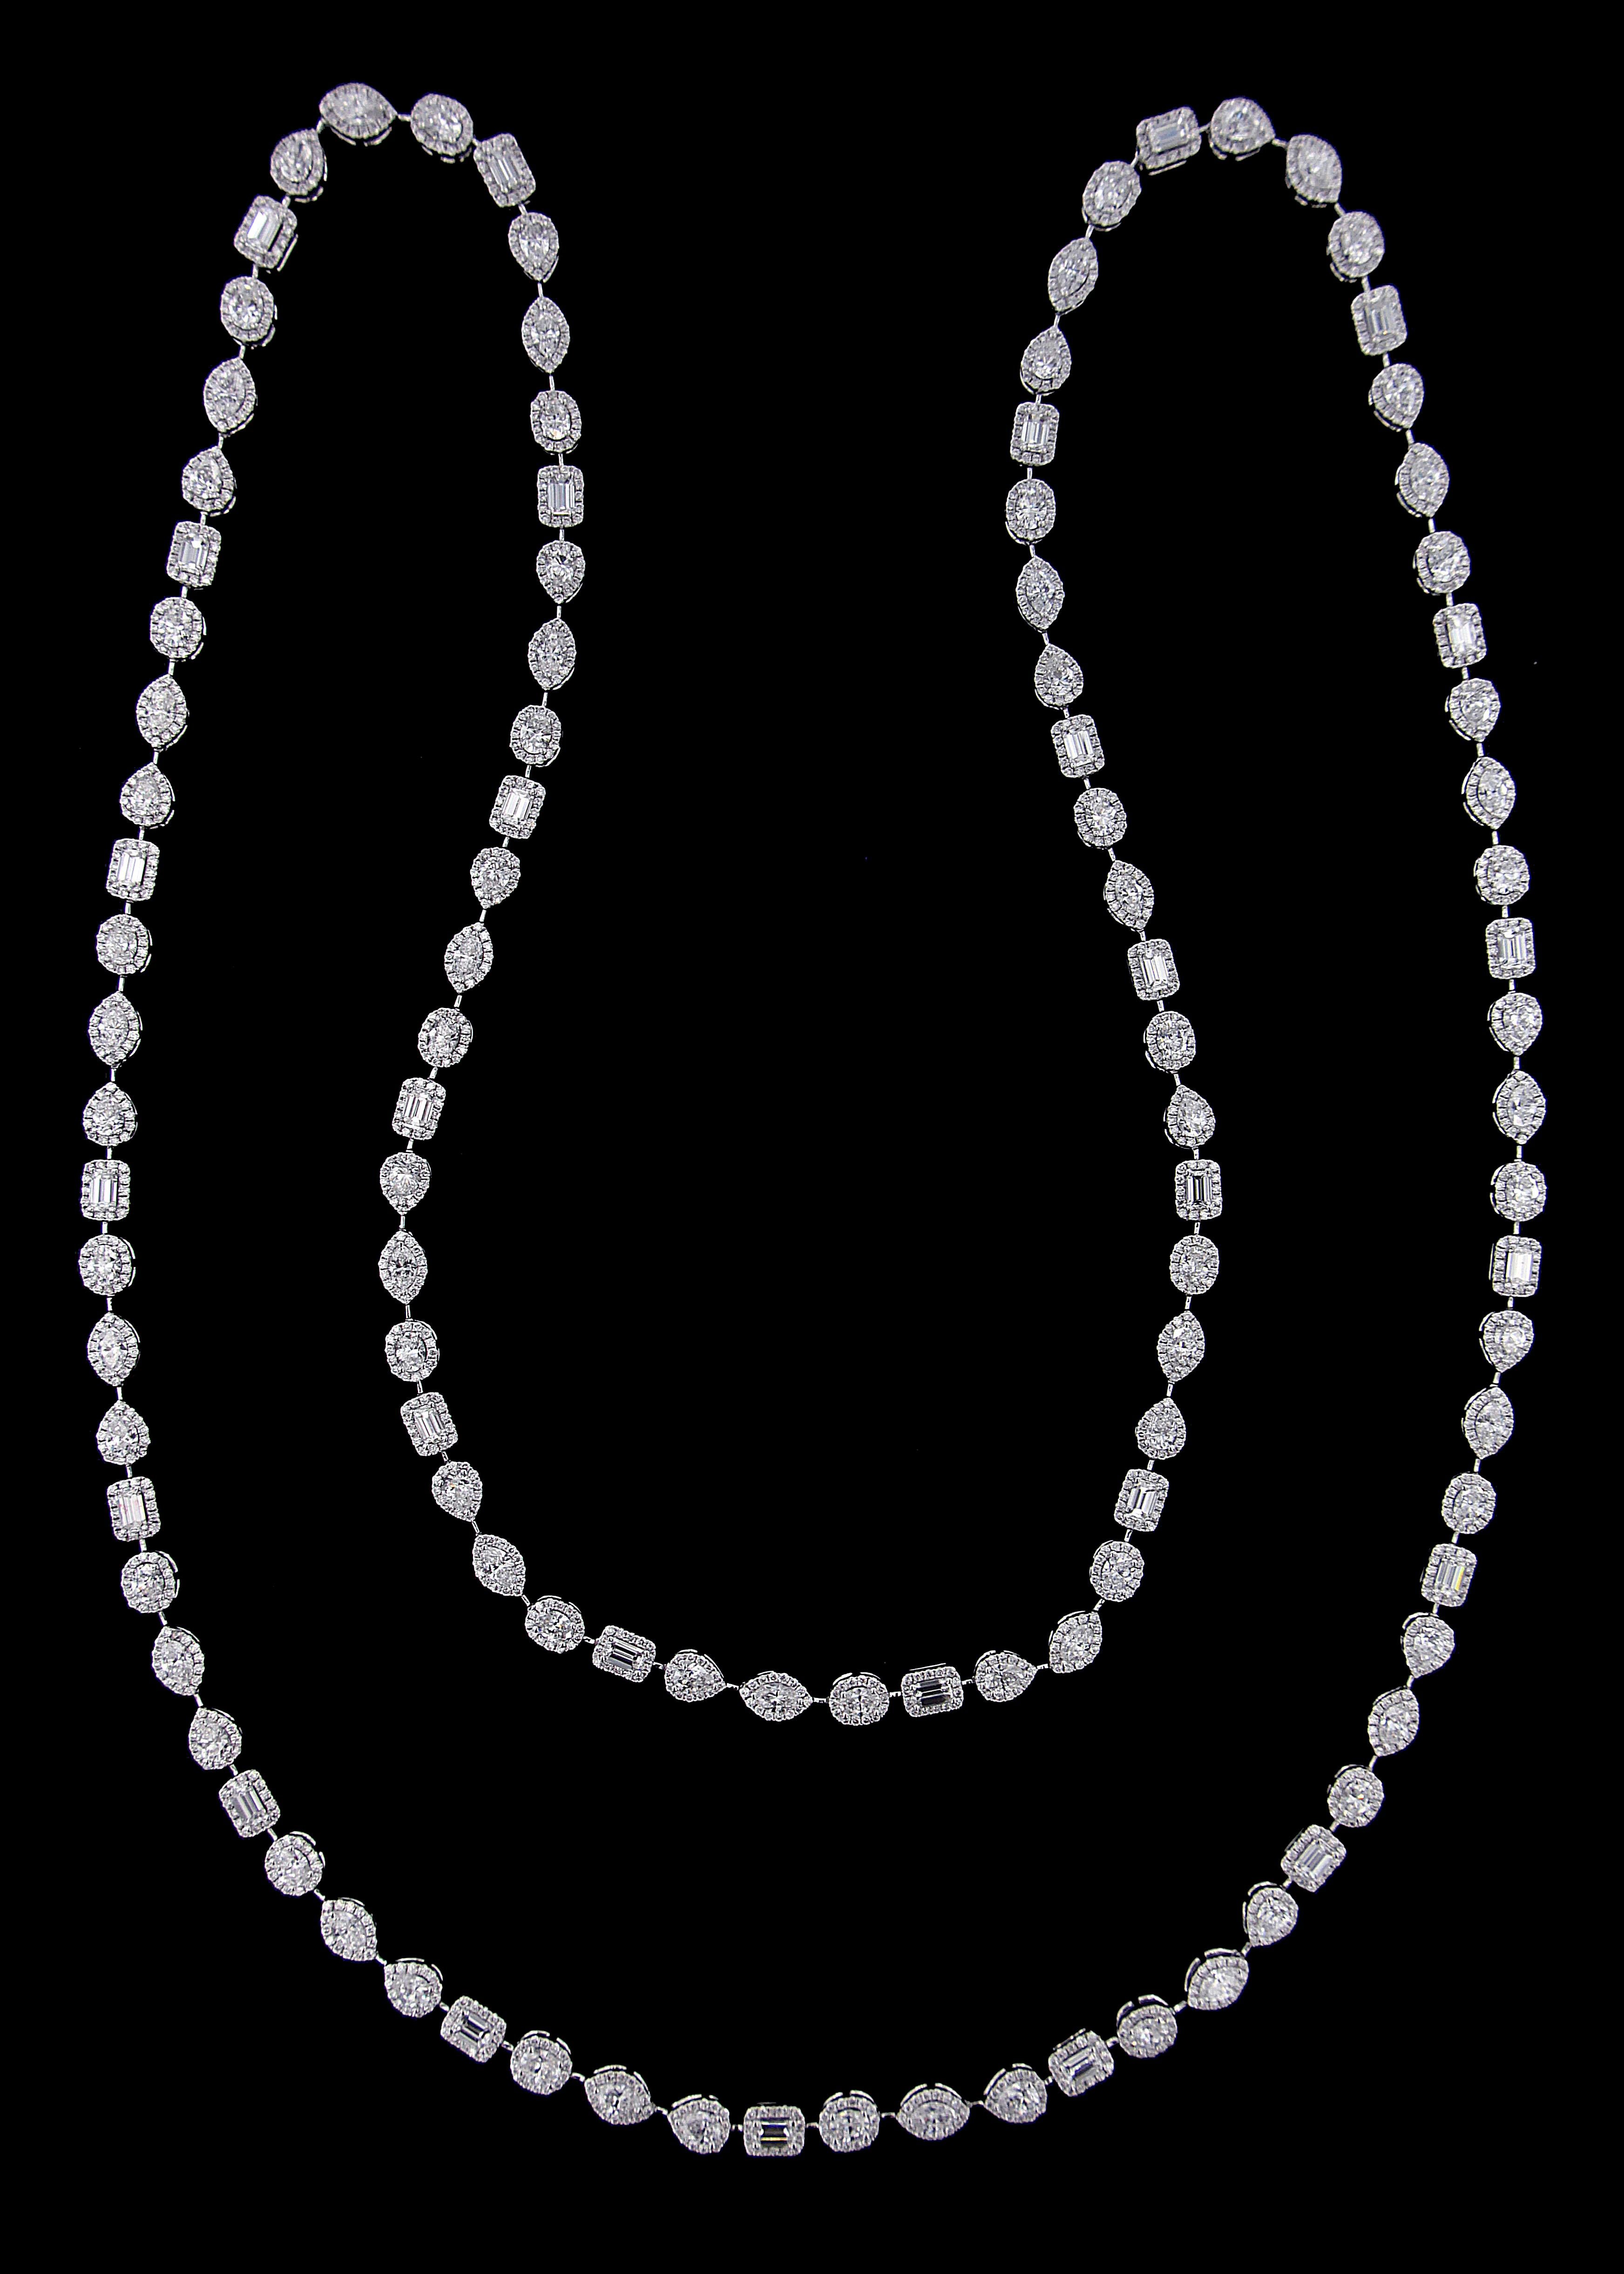 Elegant Single Line 18 Karat White Gold And Diamond Necklace.

Necklace:
Diamonds of approximately 28.158 carats, mounted on 18 karat white gold necklace. The Necklace weighs approximately around 41.148 grams.

Please note: The charges specified do